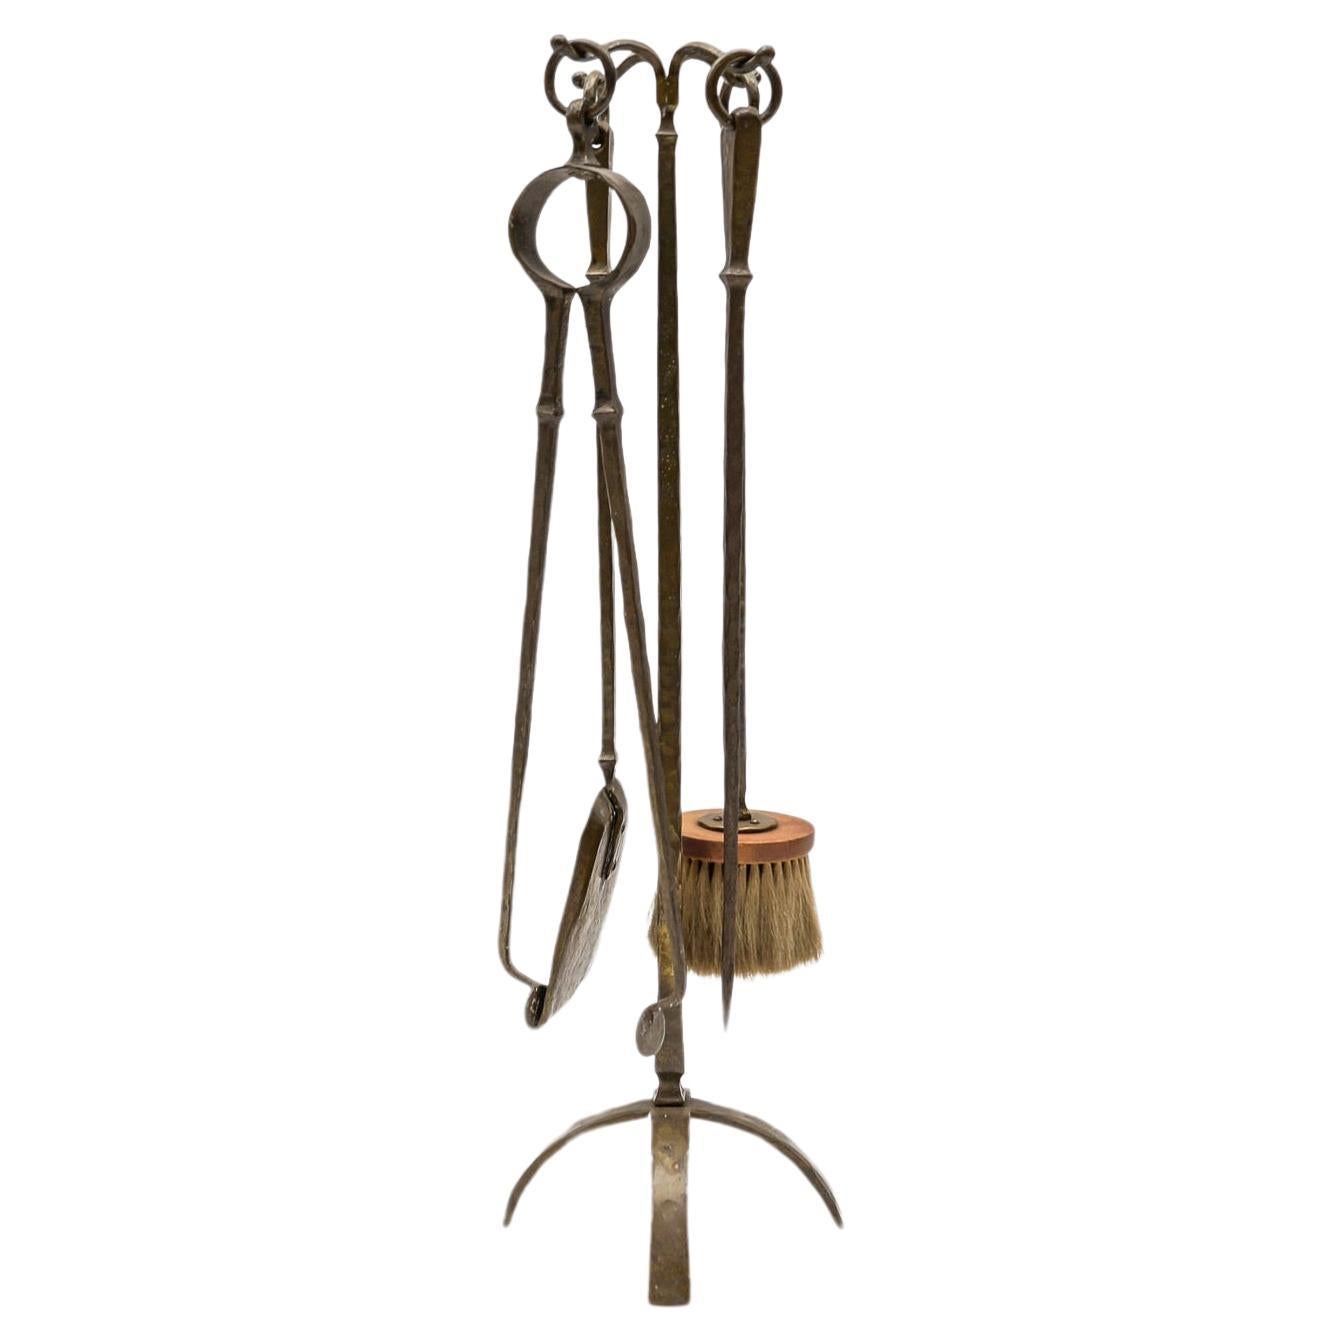 Set of Four Arts & Crafts Hand-Forged Iron Fire Utensils on a Matching Stand